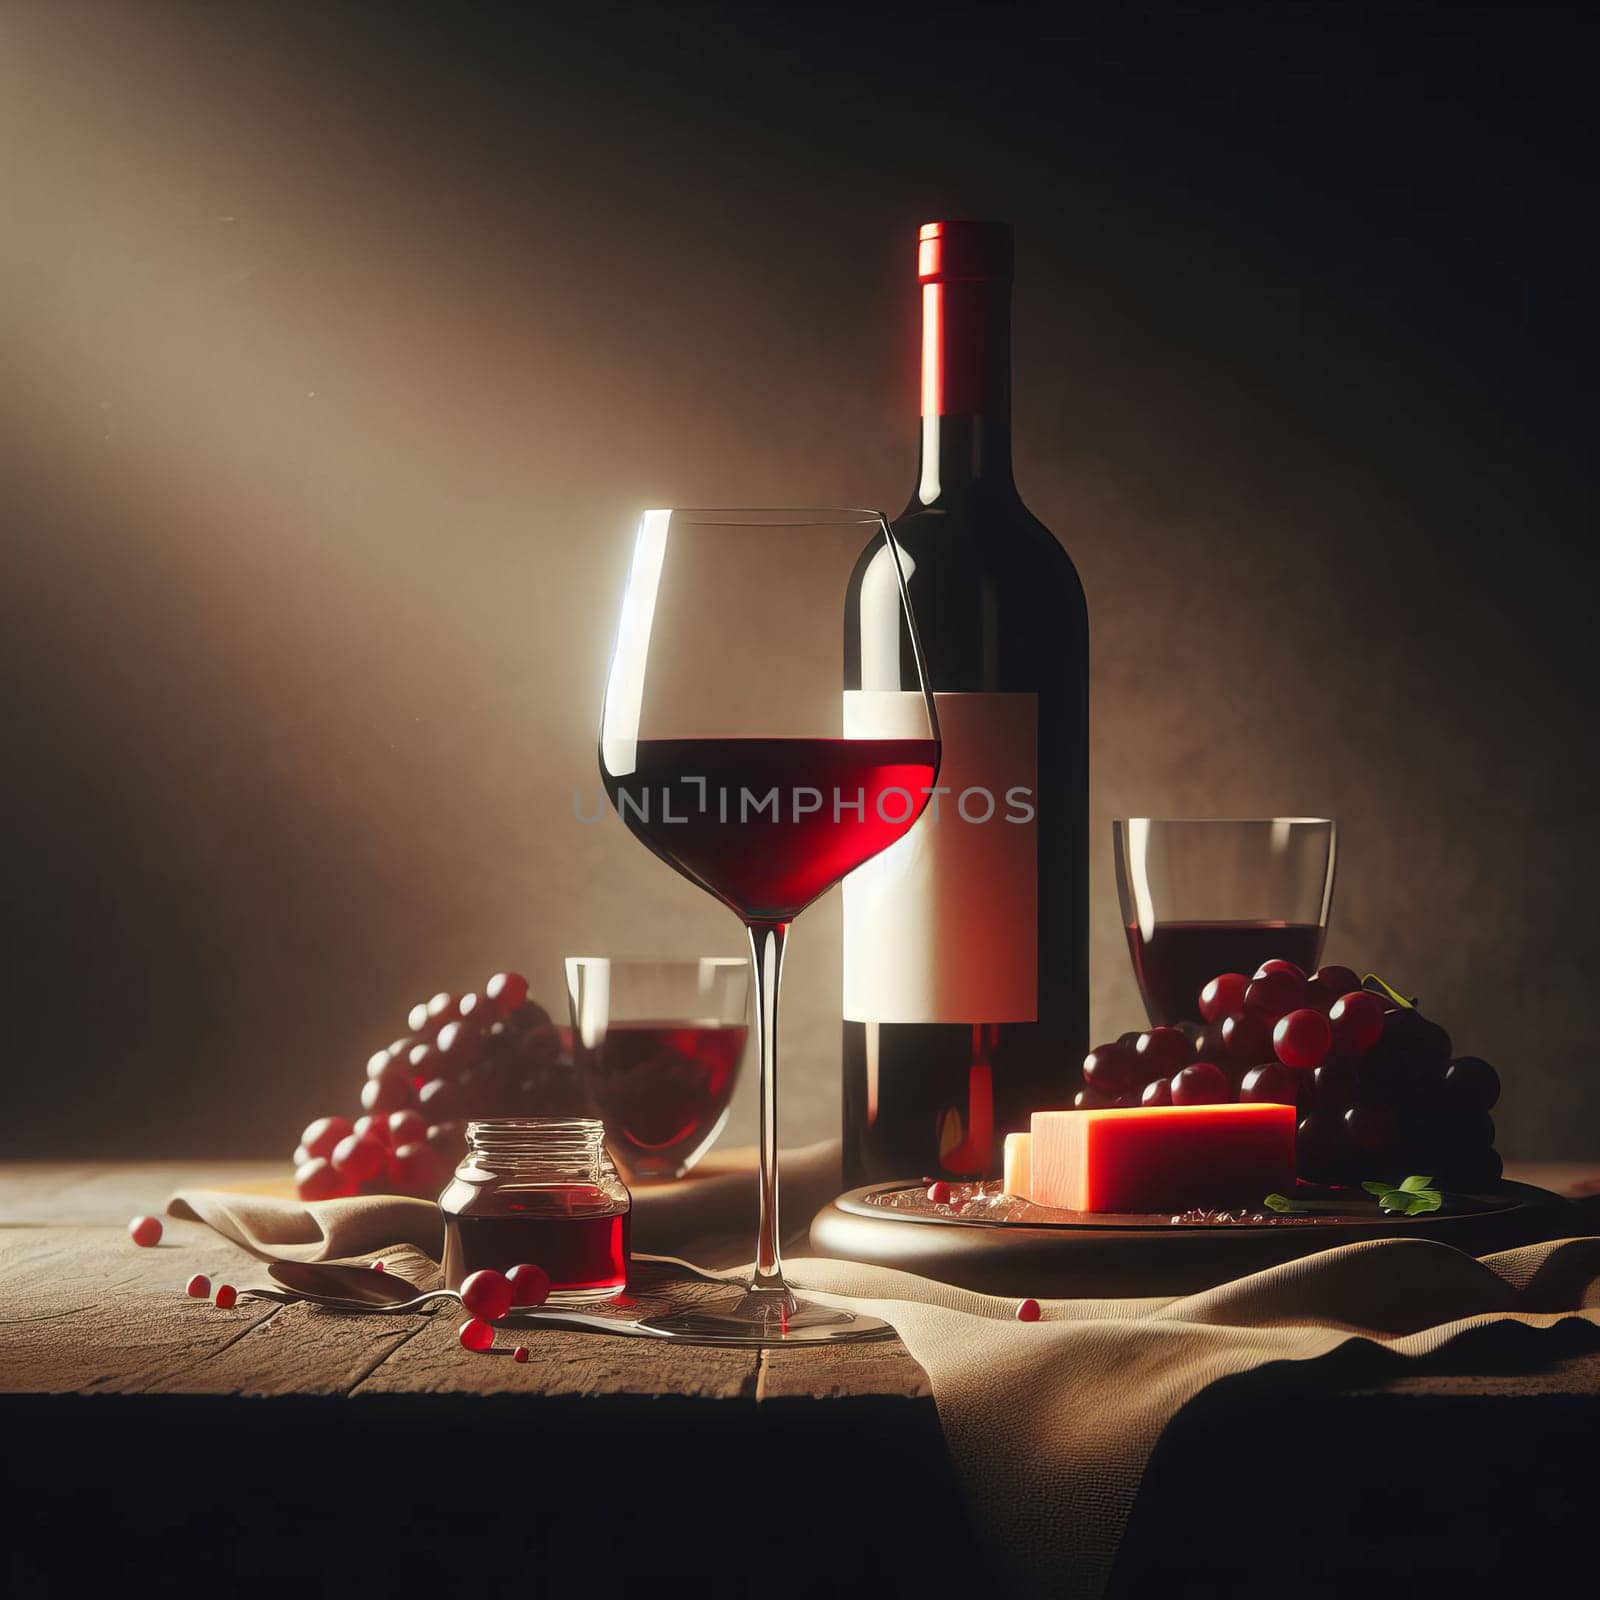 Elegant and romantic setting with a wine bottle, glass, and grapes on a table, under soft lighting